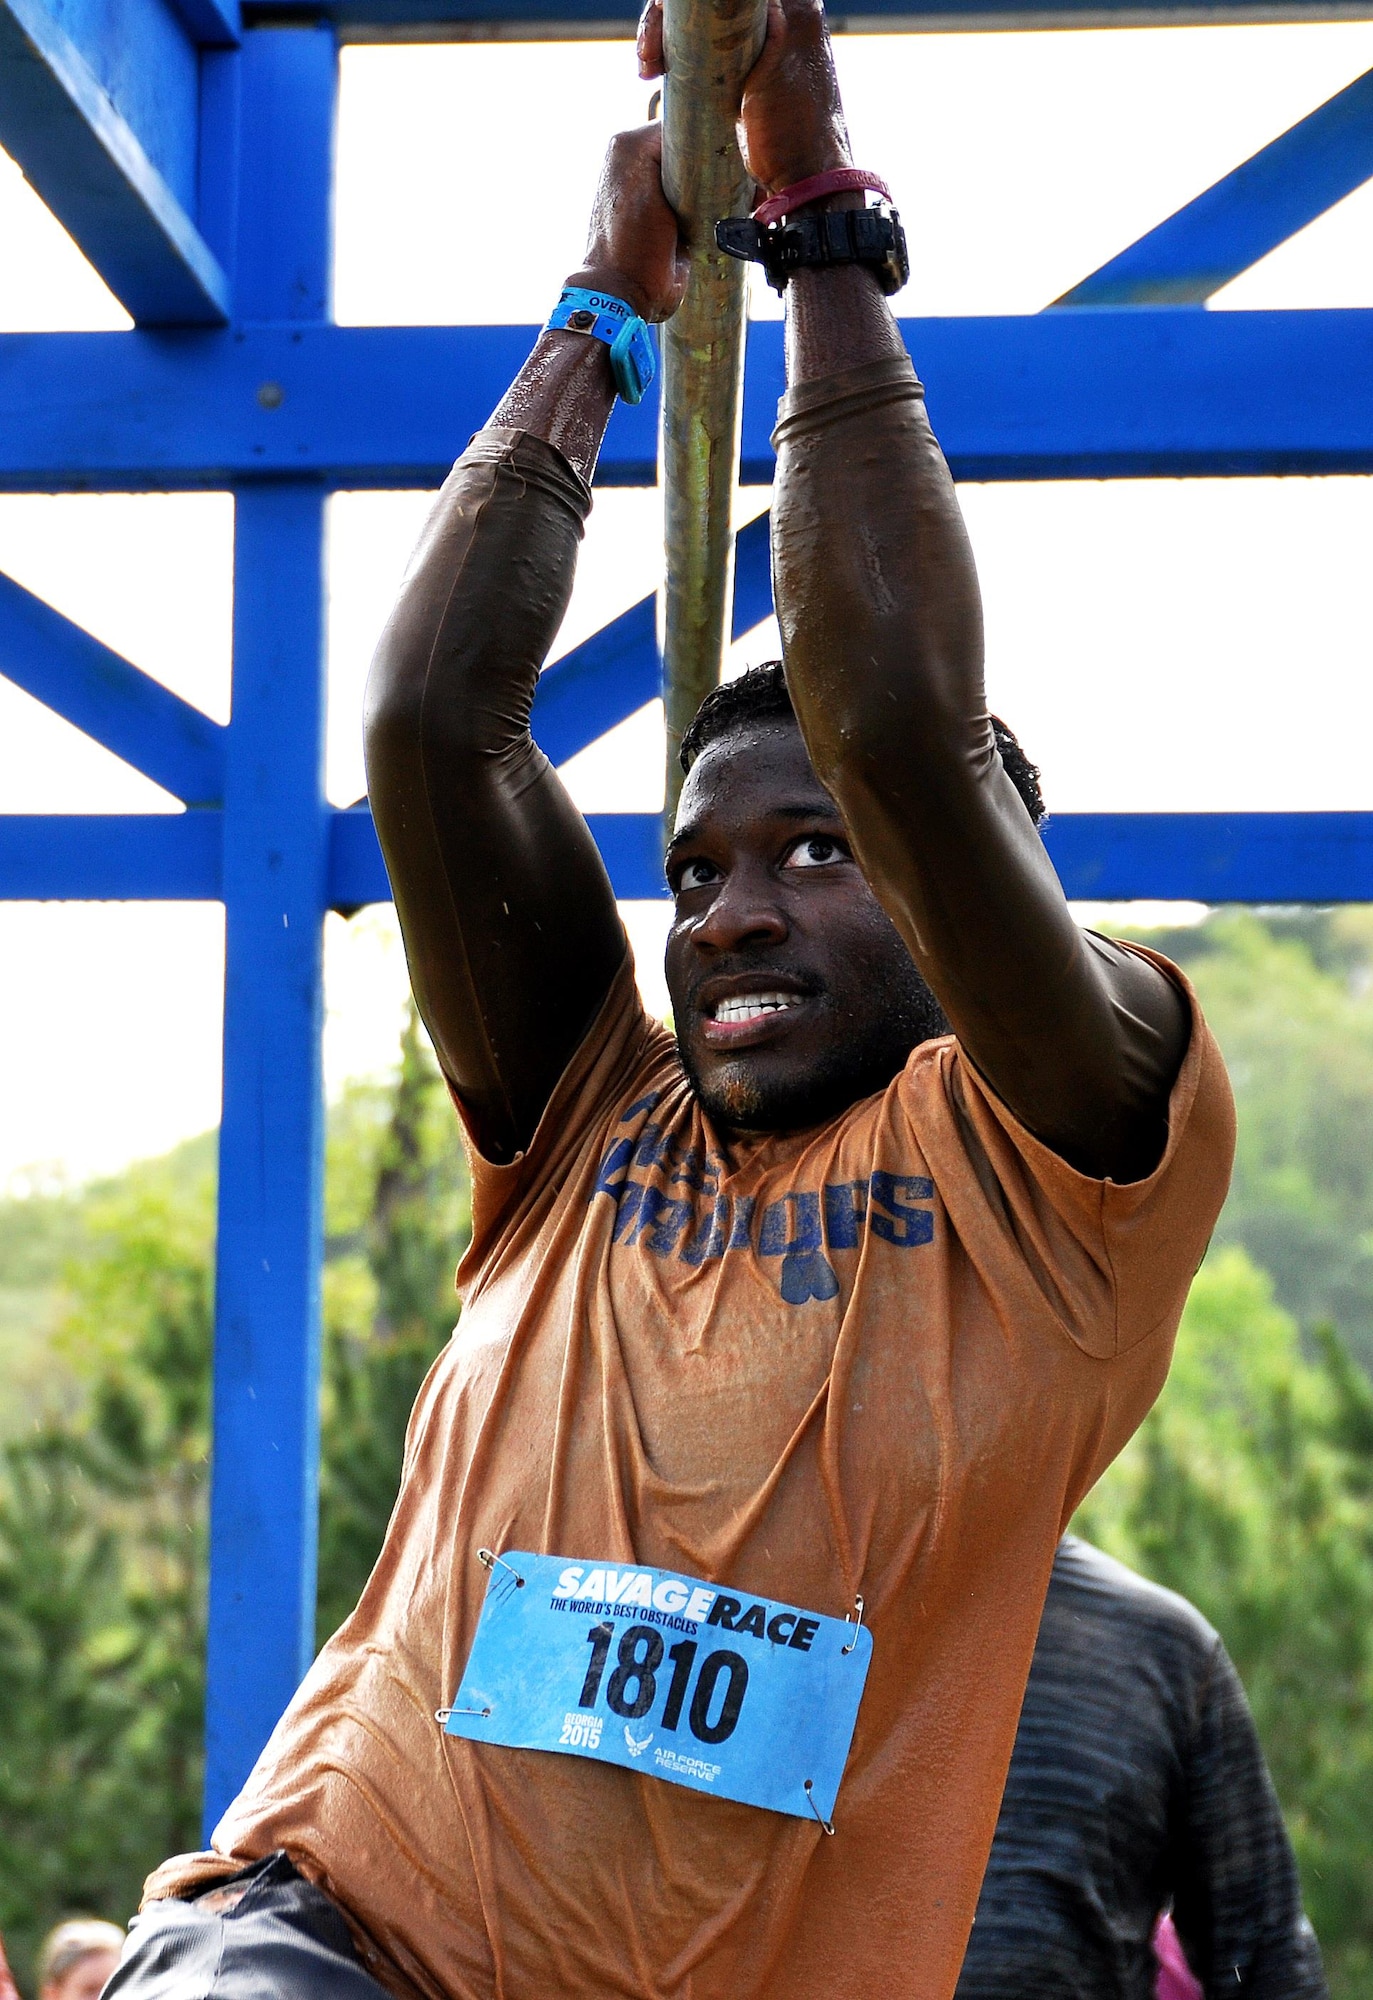 Jordan Jones, son of Senior Master Sgt. Eric Jones, 94th Logistics Readiness Squadron, shimmies across bars over a pool of water during the Georgia Spring 2015 Savage Race in Dallas, Ga., April 18, 2015. The Savage Race is an Air Force Reserve sponsored obstacle course that challenges participants in more than 20 different trials over the course of five miles. (U.S. Air Force photo/Senior Airman Daniel Phelps)